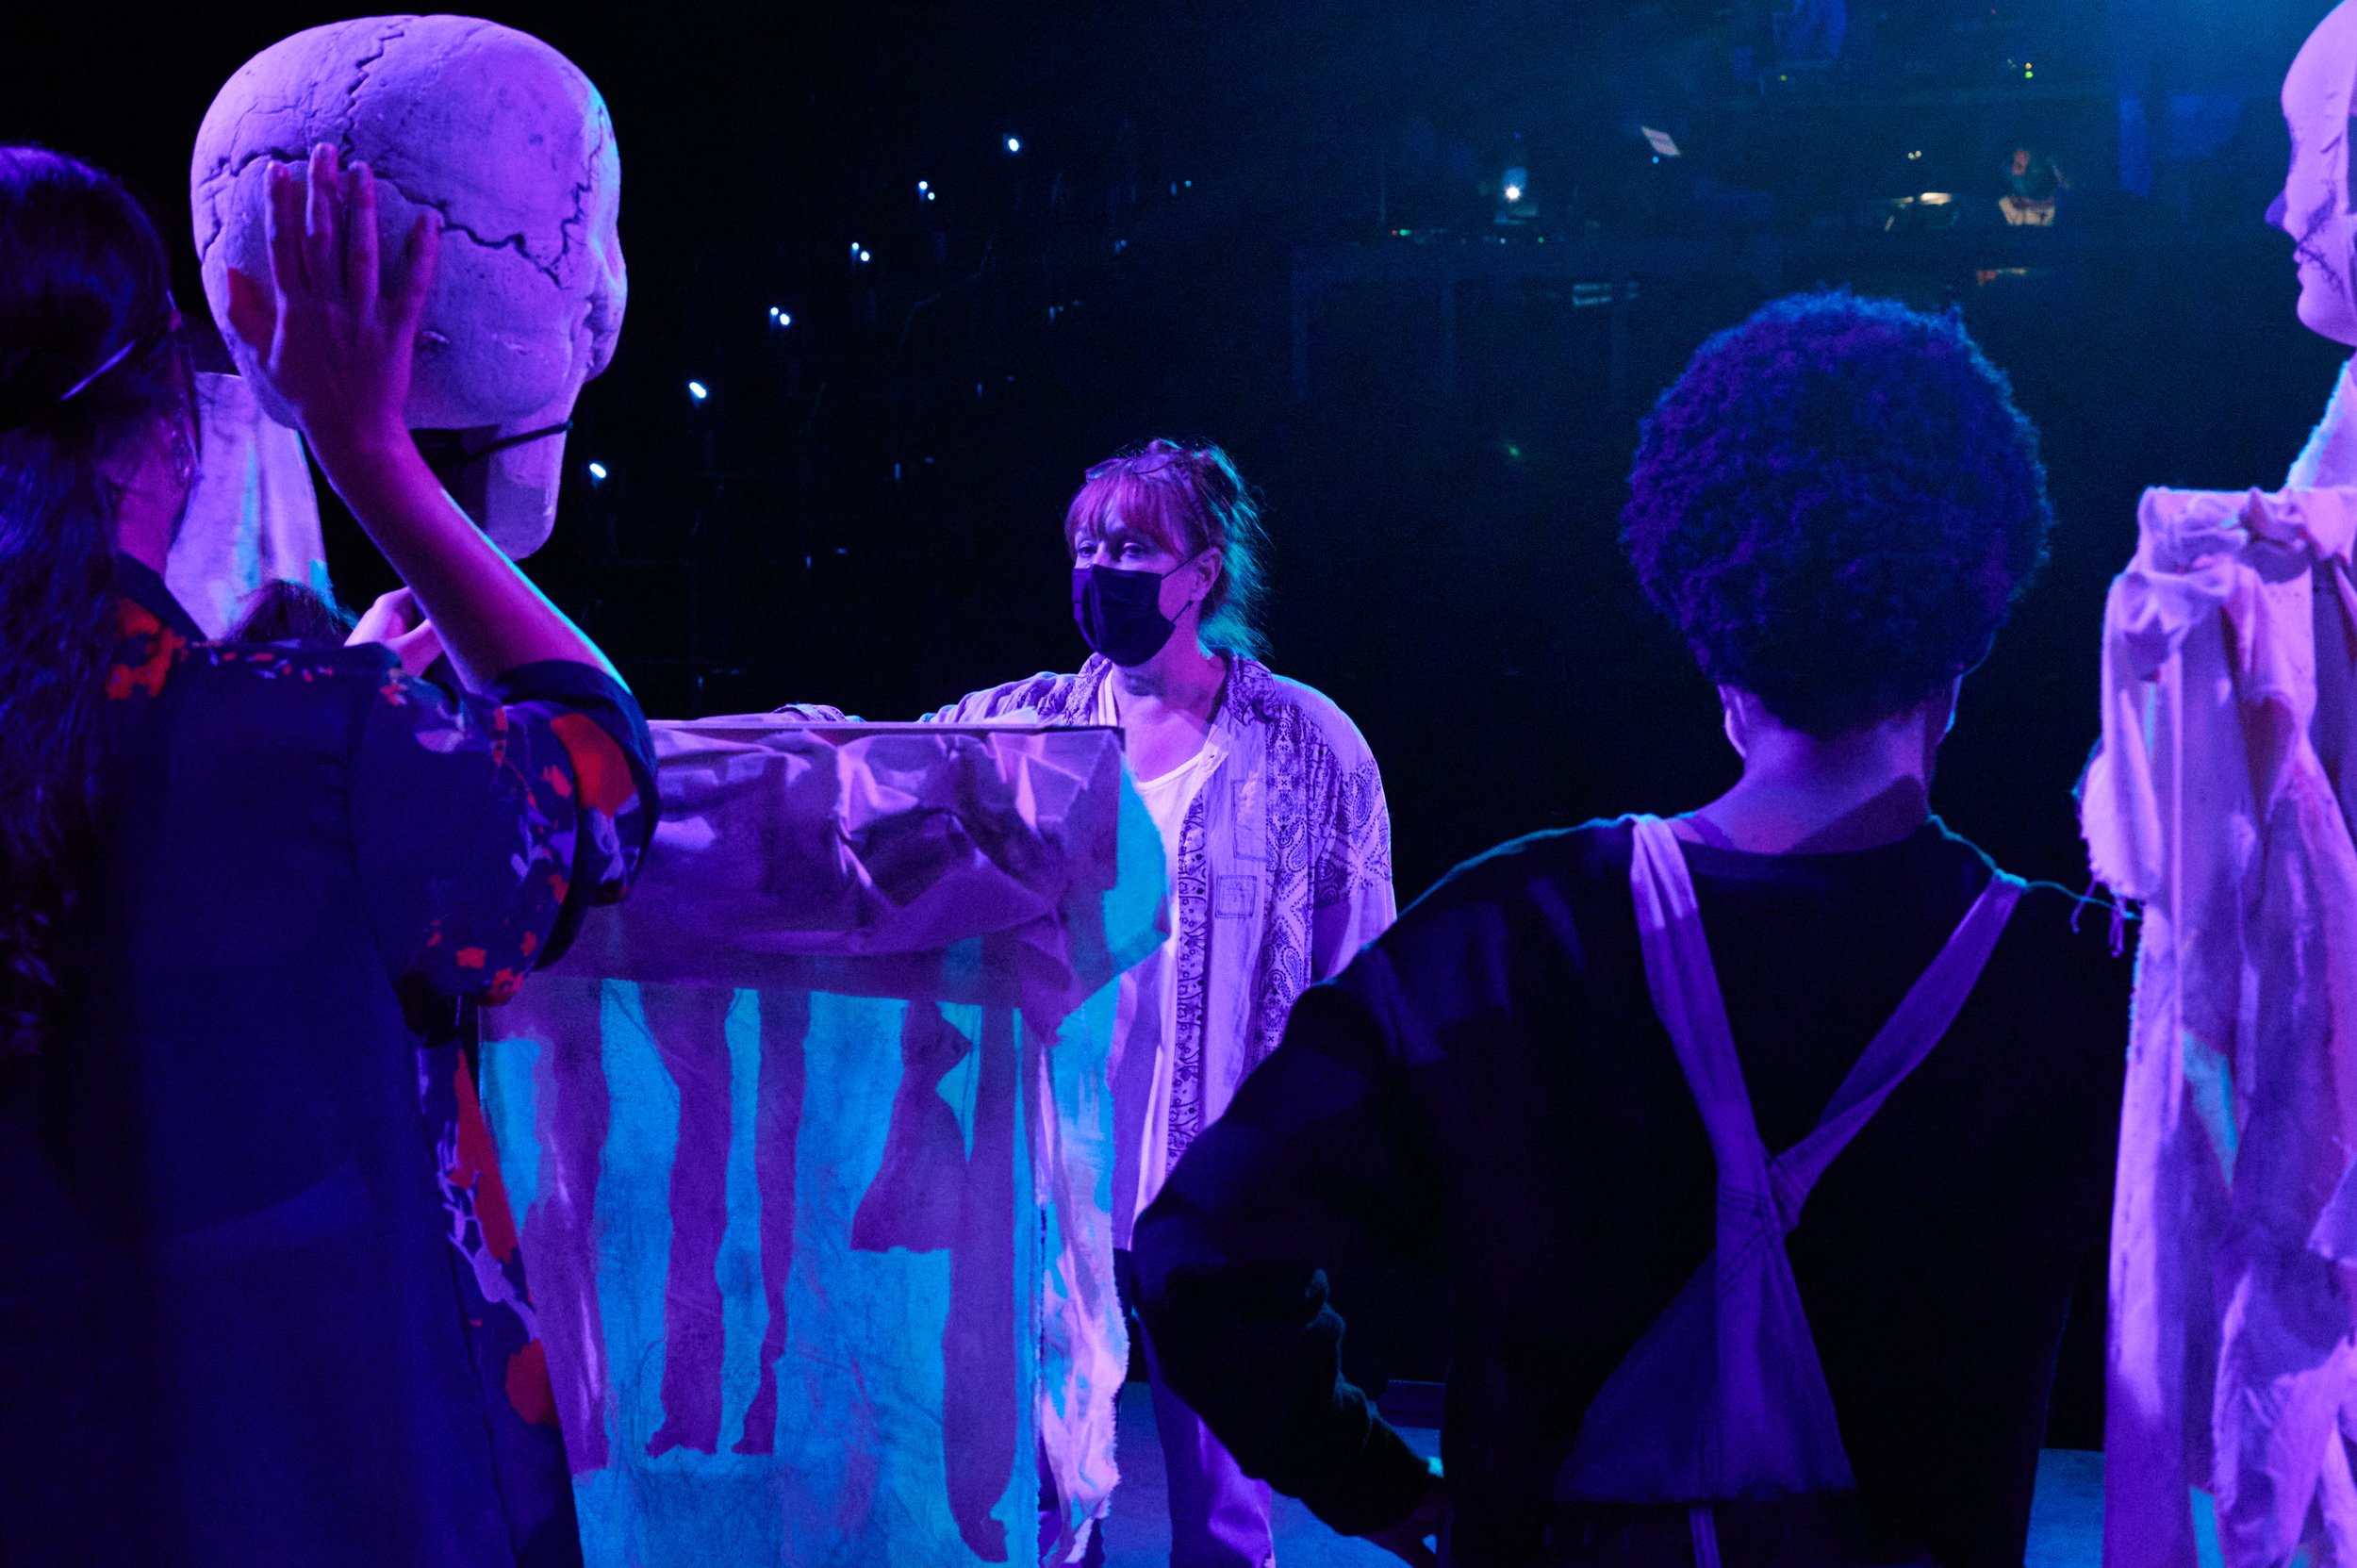  Director Terrin Adair (center) with Alice Lara Frick and Amari Smith during rehearsal of the Santa Monica College Theatre Arts production of "Treasure Island" at the SMC Main Stage on Thursday, May 12, 2022, in Santa Monica, Calif. (Nicholas McCall 